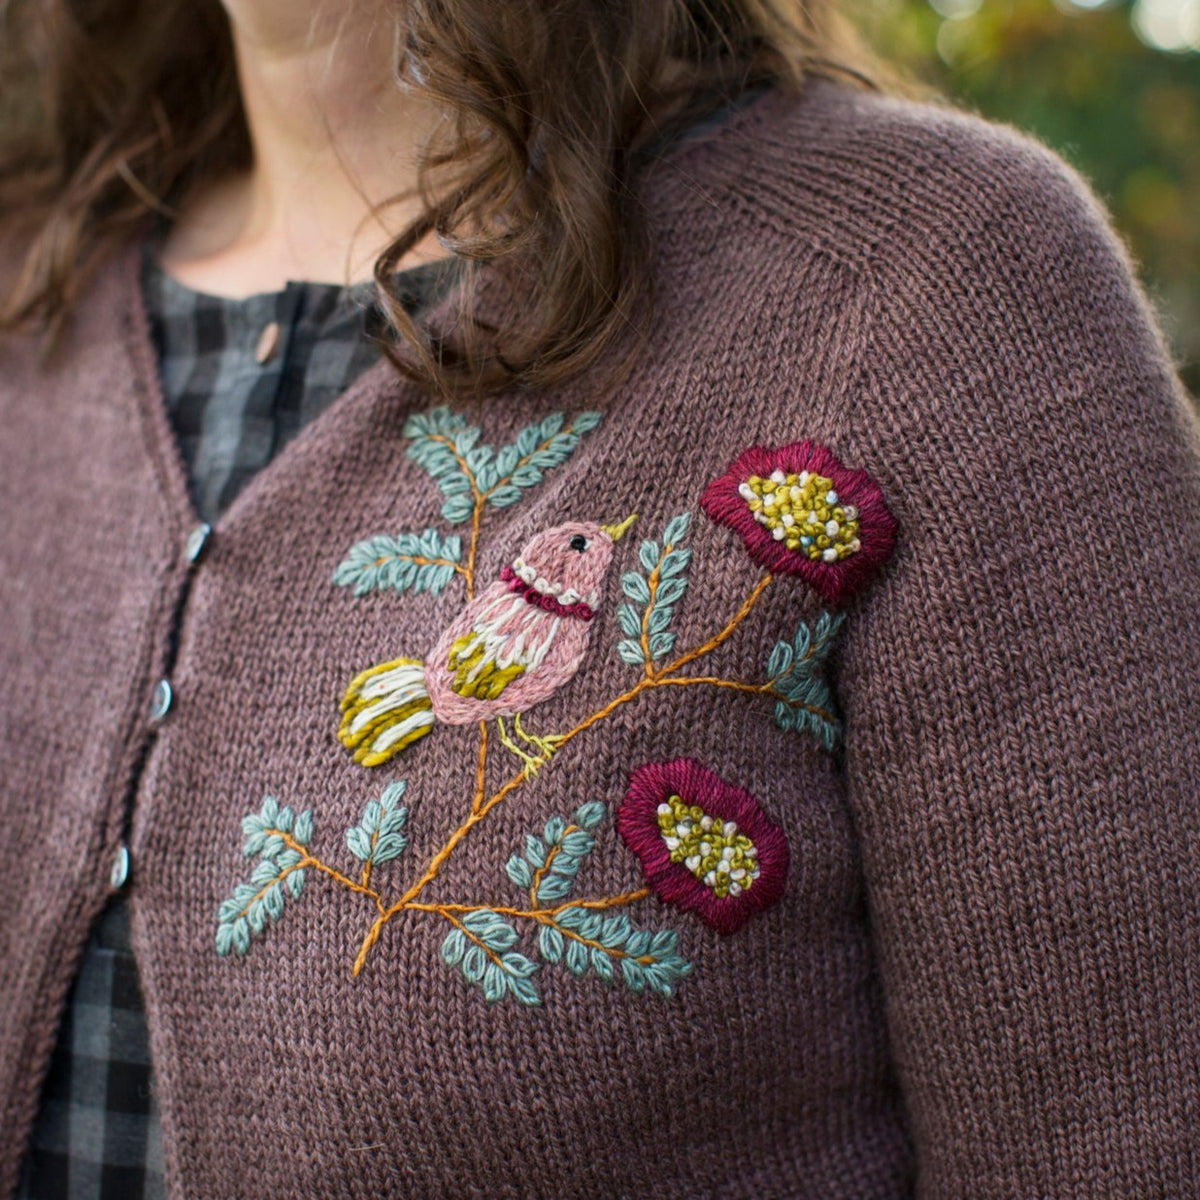 Embroidery on Knits book – Noma Knits